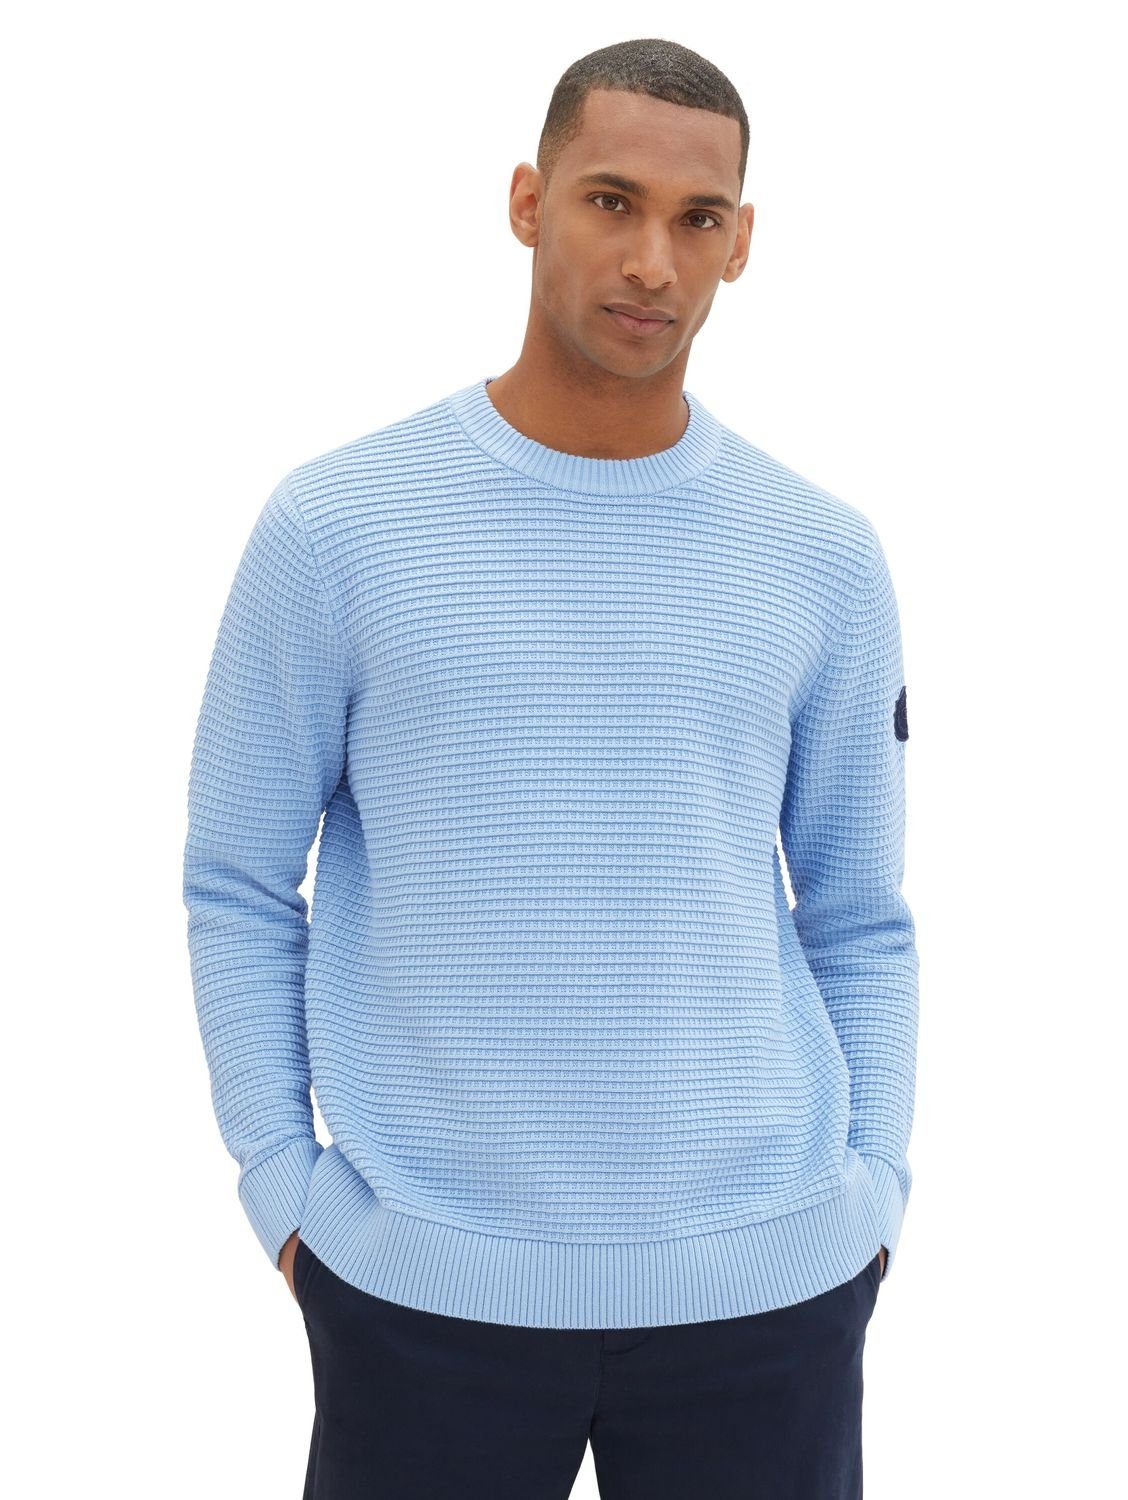 STRUCTURED Washed Baumwolle CREWNECK aus TOM KNIT 32245 Middle TAILOR Strickpullover Out Blue